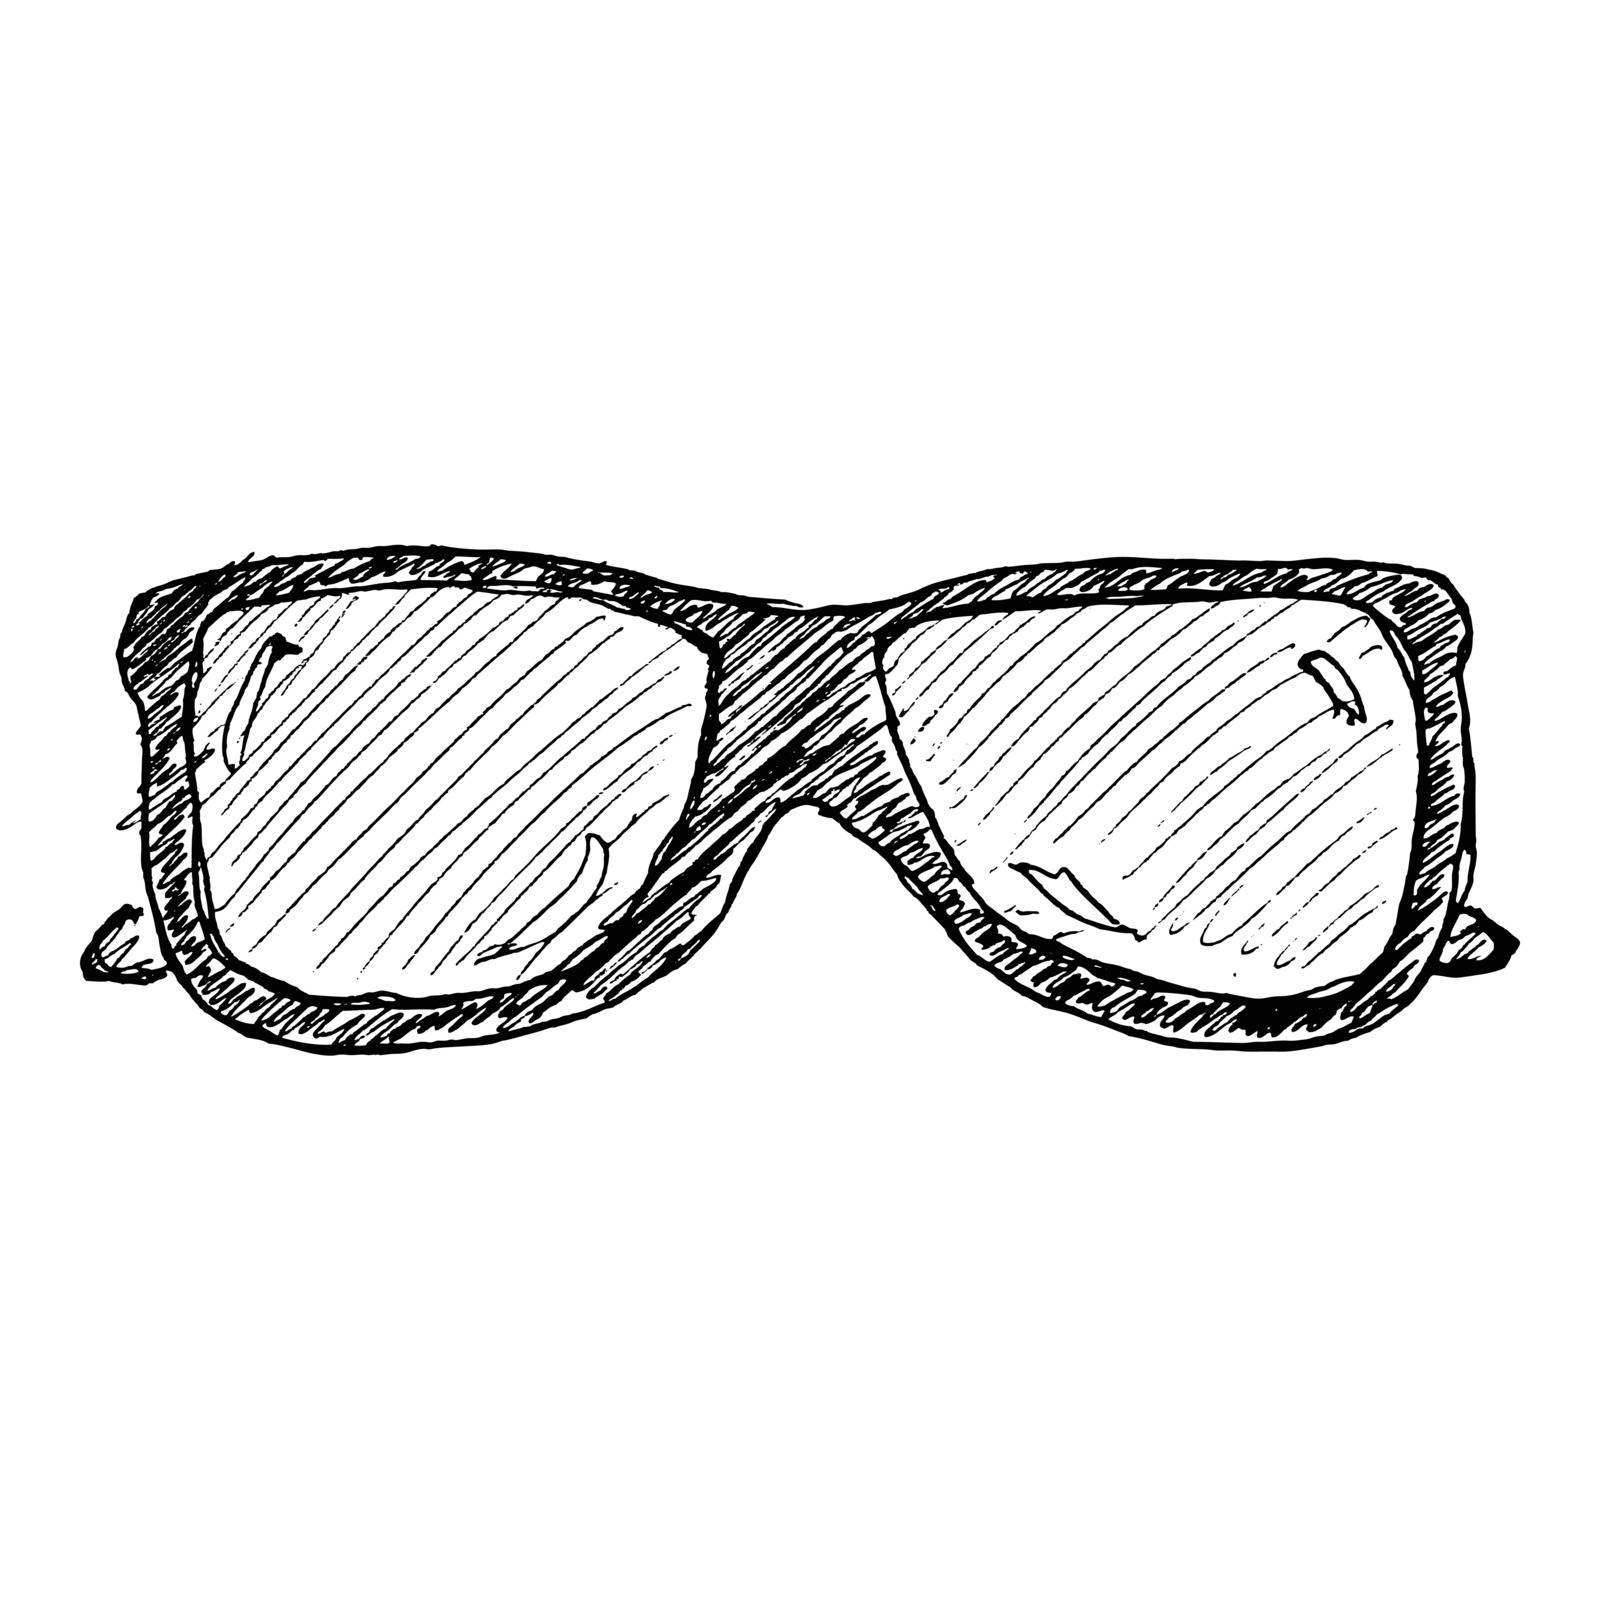 Hand drawn illustration of a pair of sunglasses